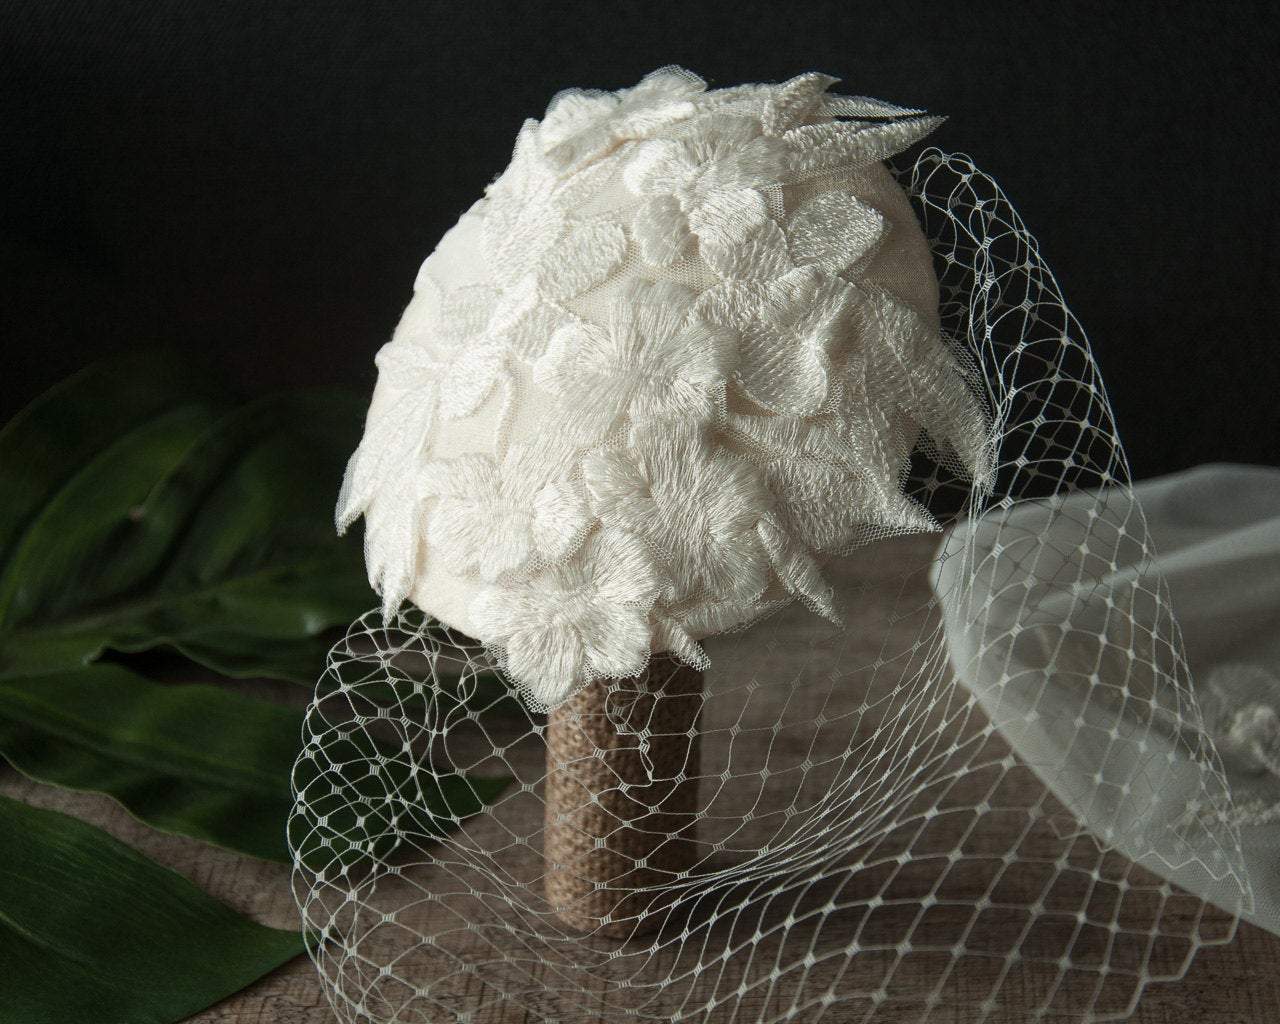 BIRDCAGE - BRIDAL VEIL FASCINATOR COVERED WITH LACE IN OFF WHITE, CREME OR IVORY COLOUR © Seegang Berlin